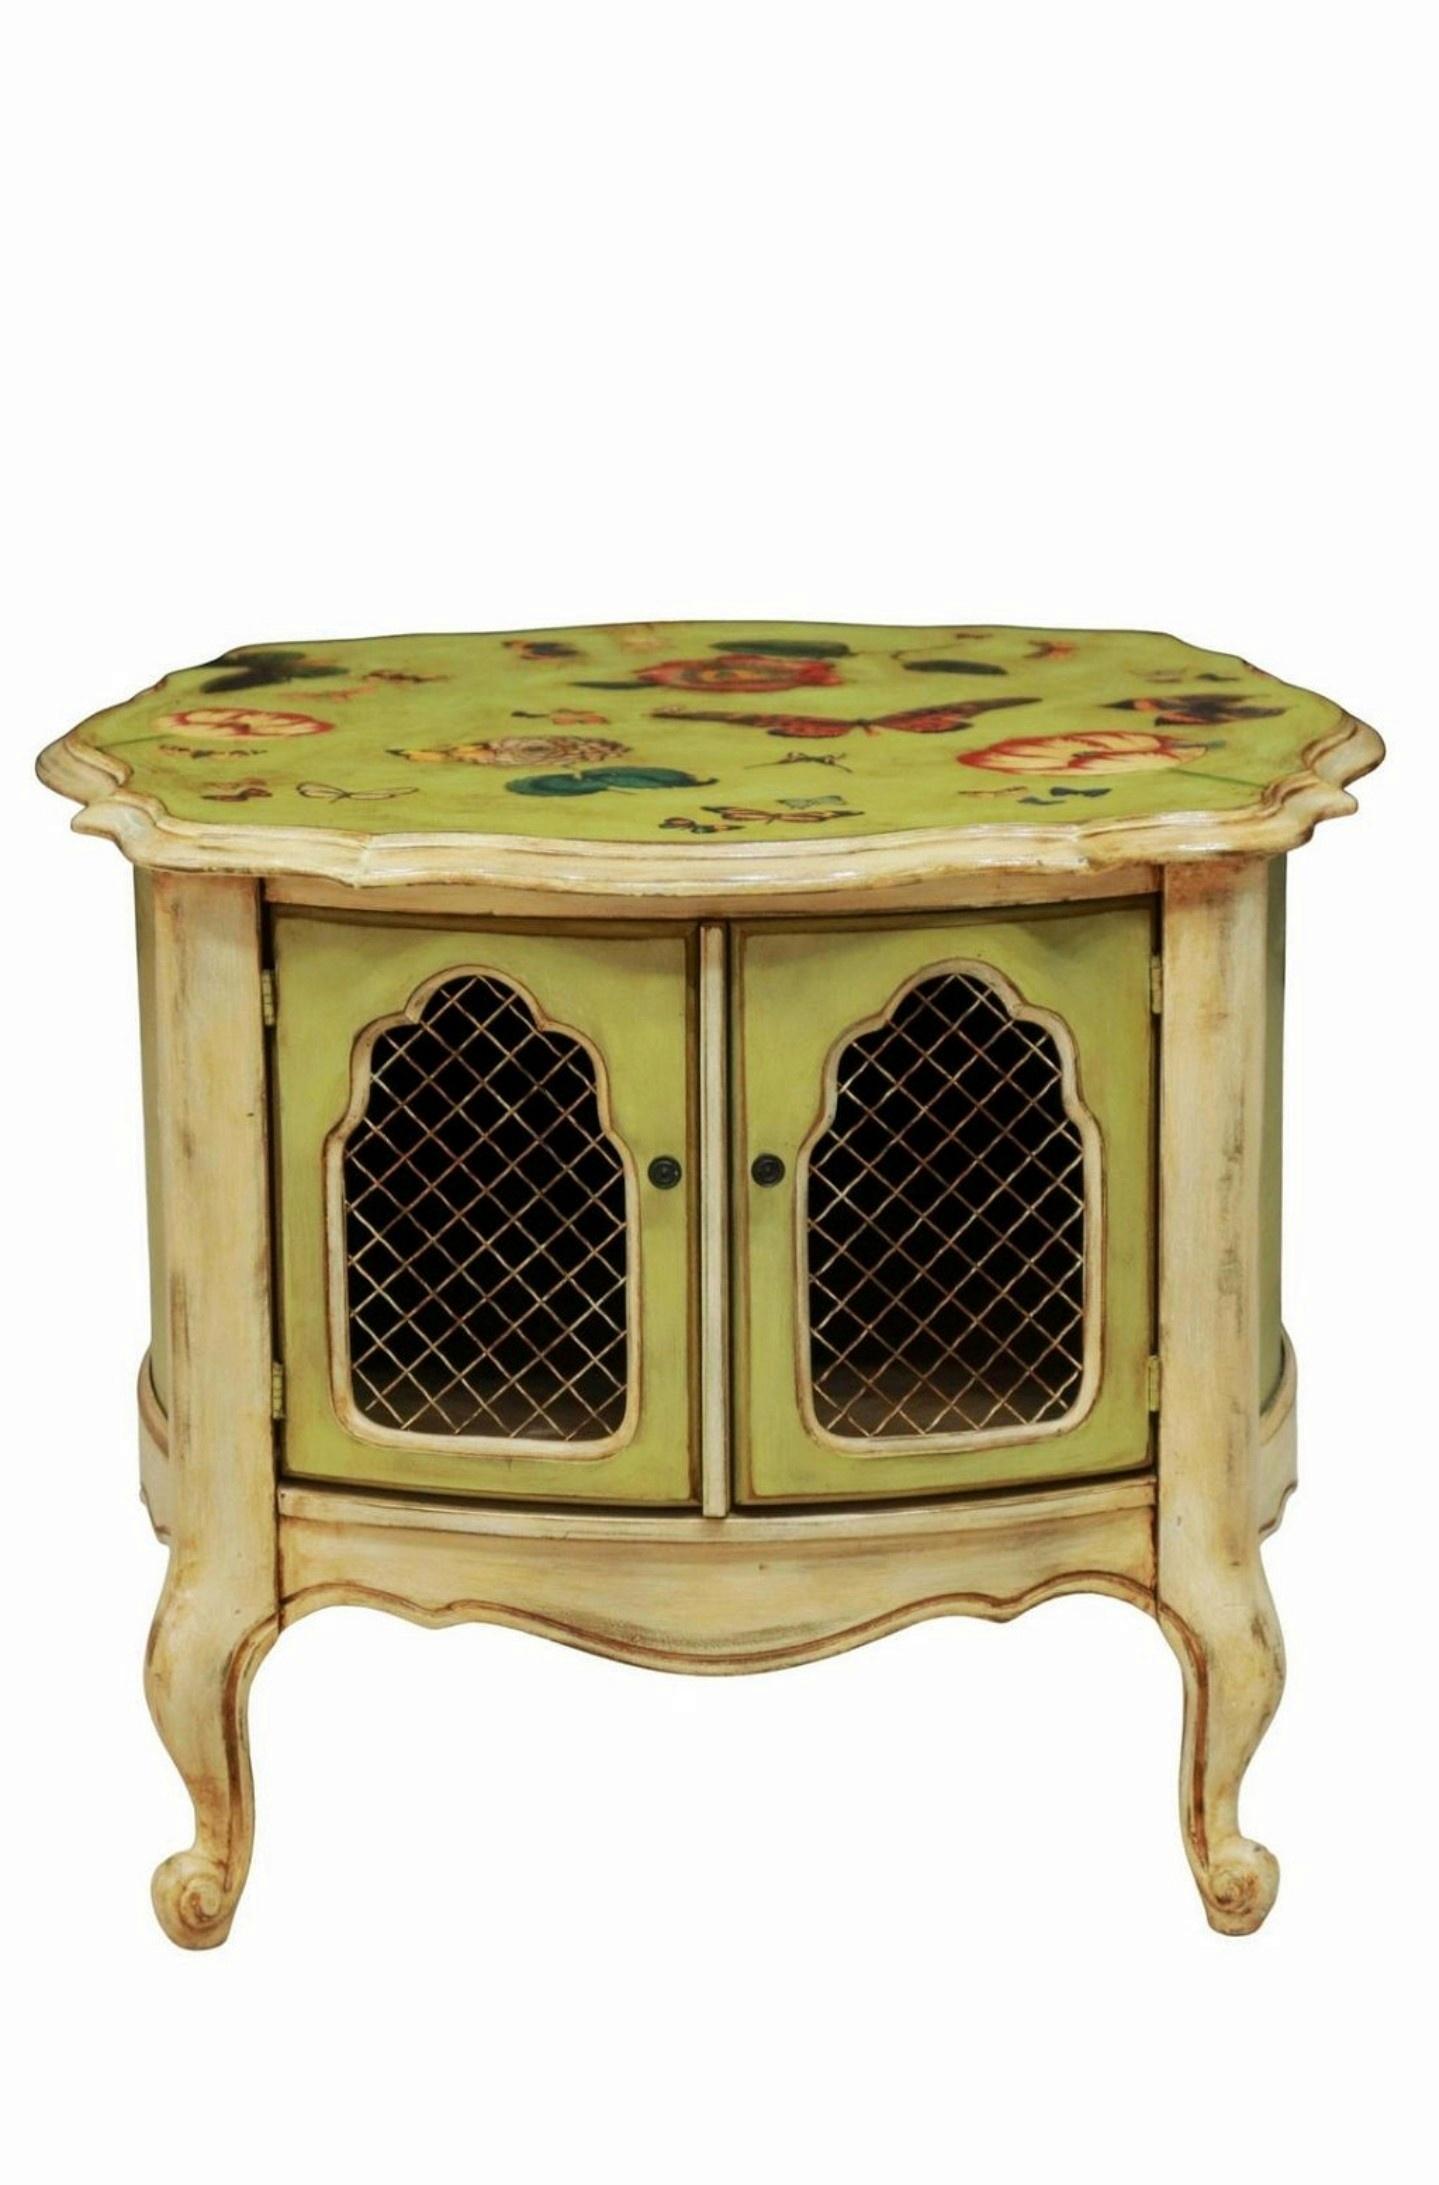 A vintage Italian Provincial style paint decorated end table with distressed patina finish. 

Dating to the mid-20th century, featuring artistic Florentine artisan découpage. Florence, Italy. Drum table form, Louis XV taste, having a large shaped